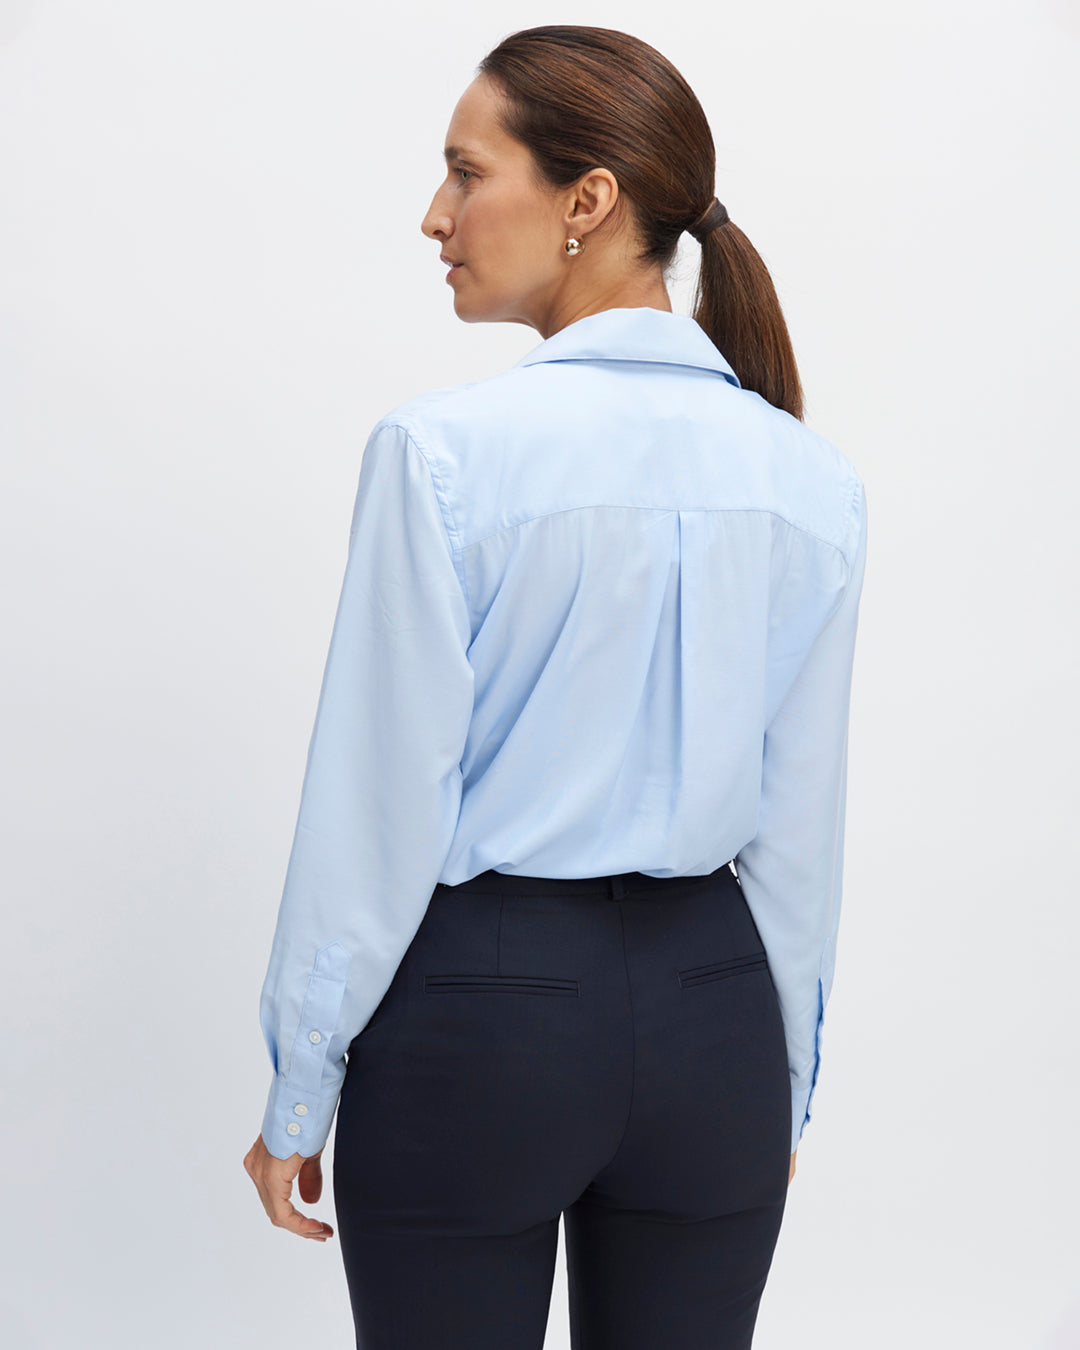 Shirt-blue-sky-straight-cut-Italian-collar-long-sleeves-capuchin-bottom-of-sleeve-pinch-in-the-back-poplin-cotton-trees-fluid-sept-buttons-white-17H10-tailors-for-women-paris-